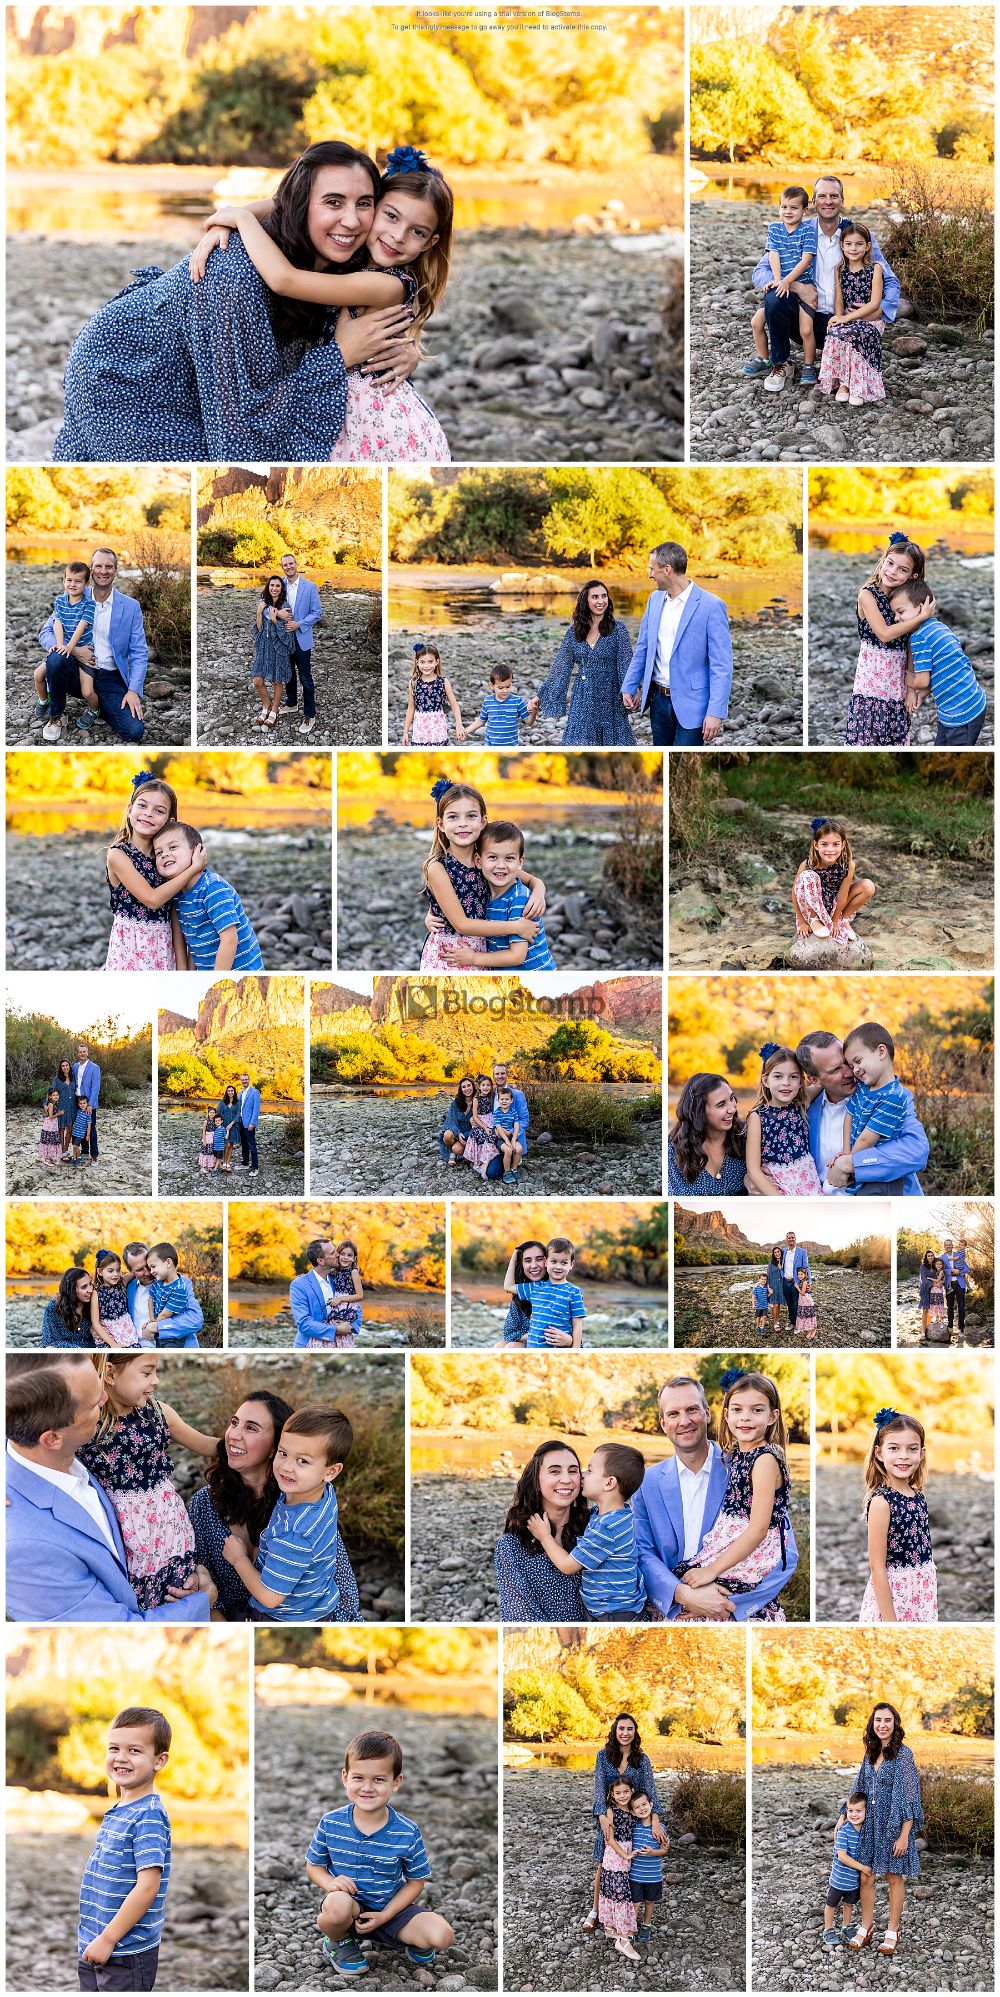 Tips for a Successful Family Lifestyle Photoshoot